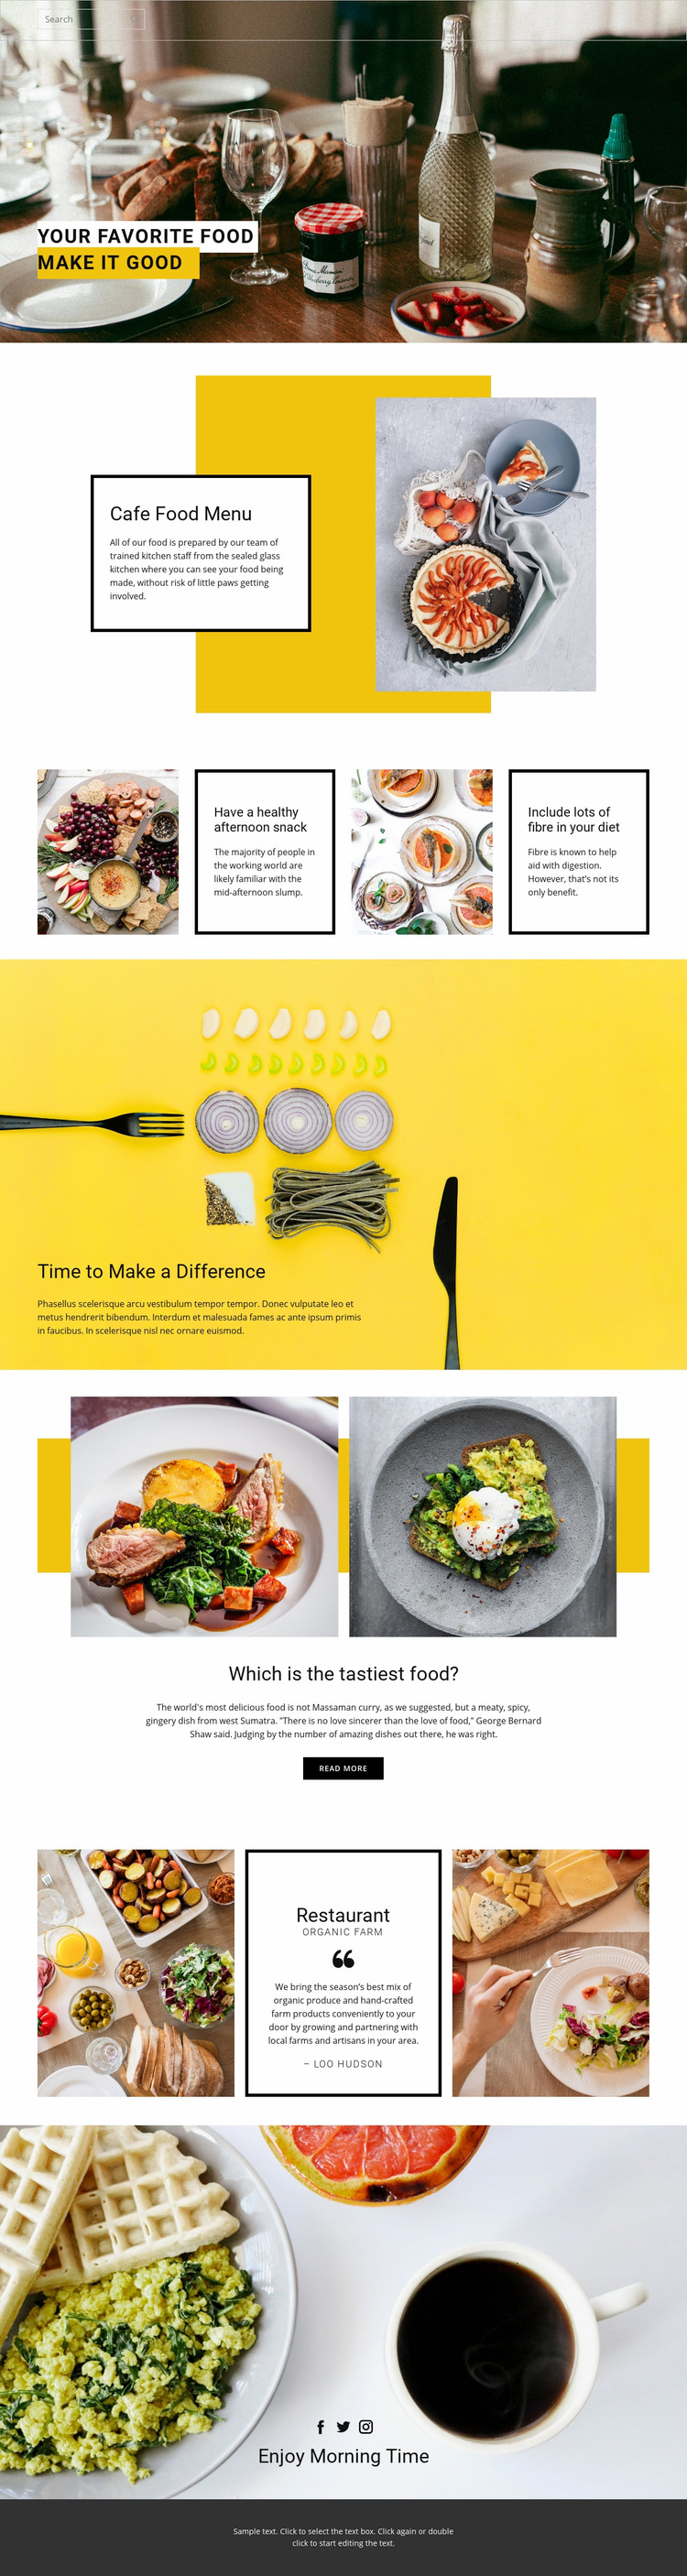 Cook your favorite food Web Page Design